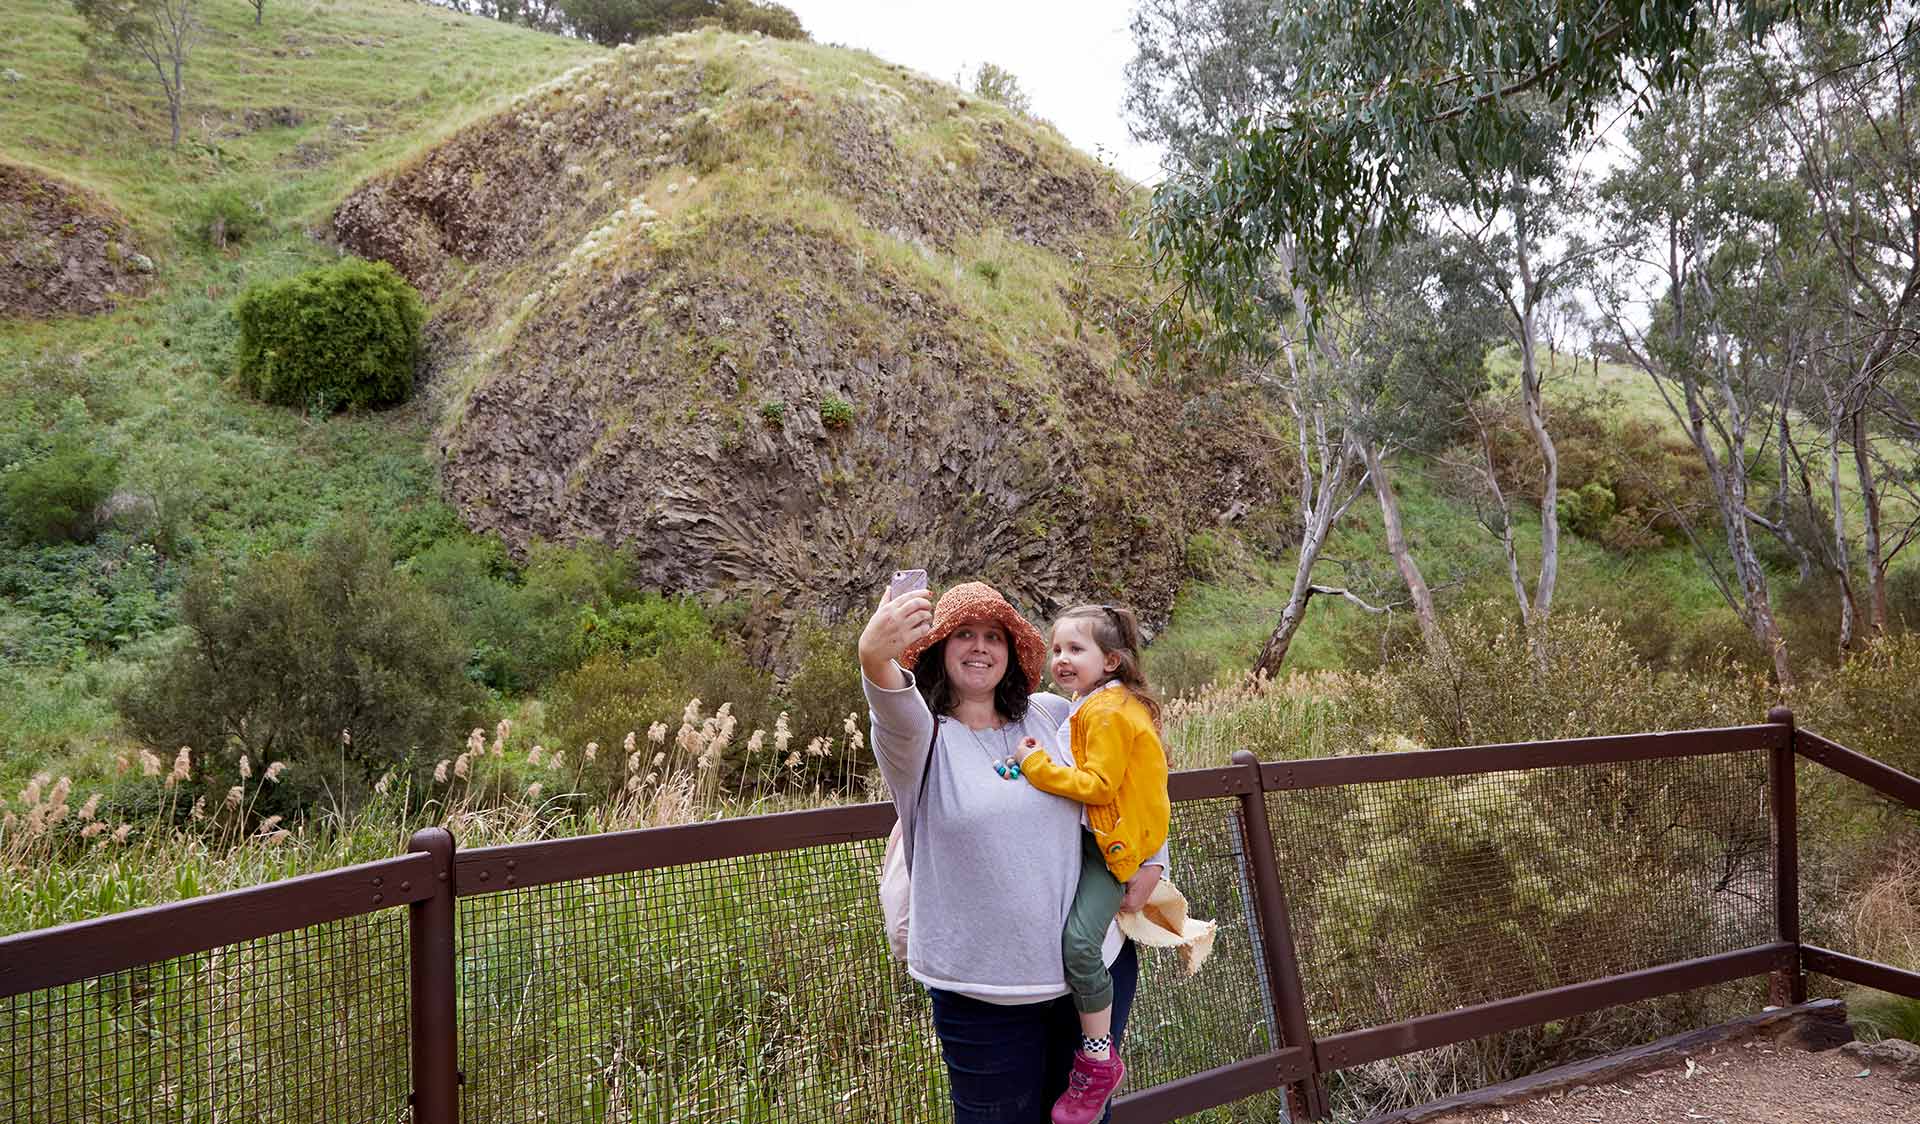 A women and her infant child stop to take a selfie in front of Rosette Rock in Organ Pipes National Park.